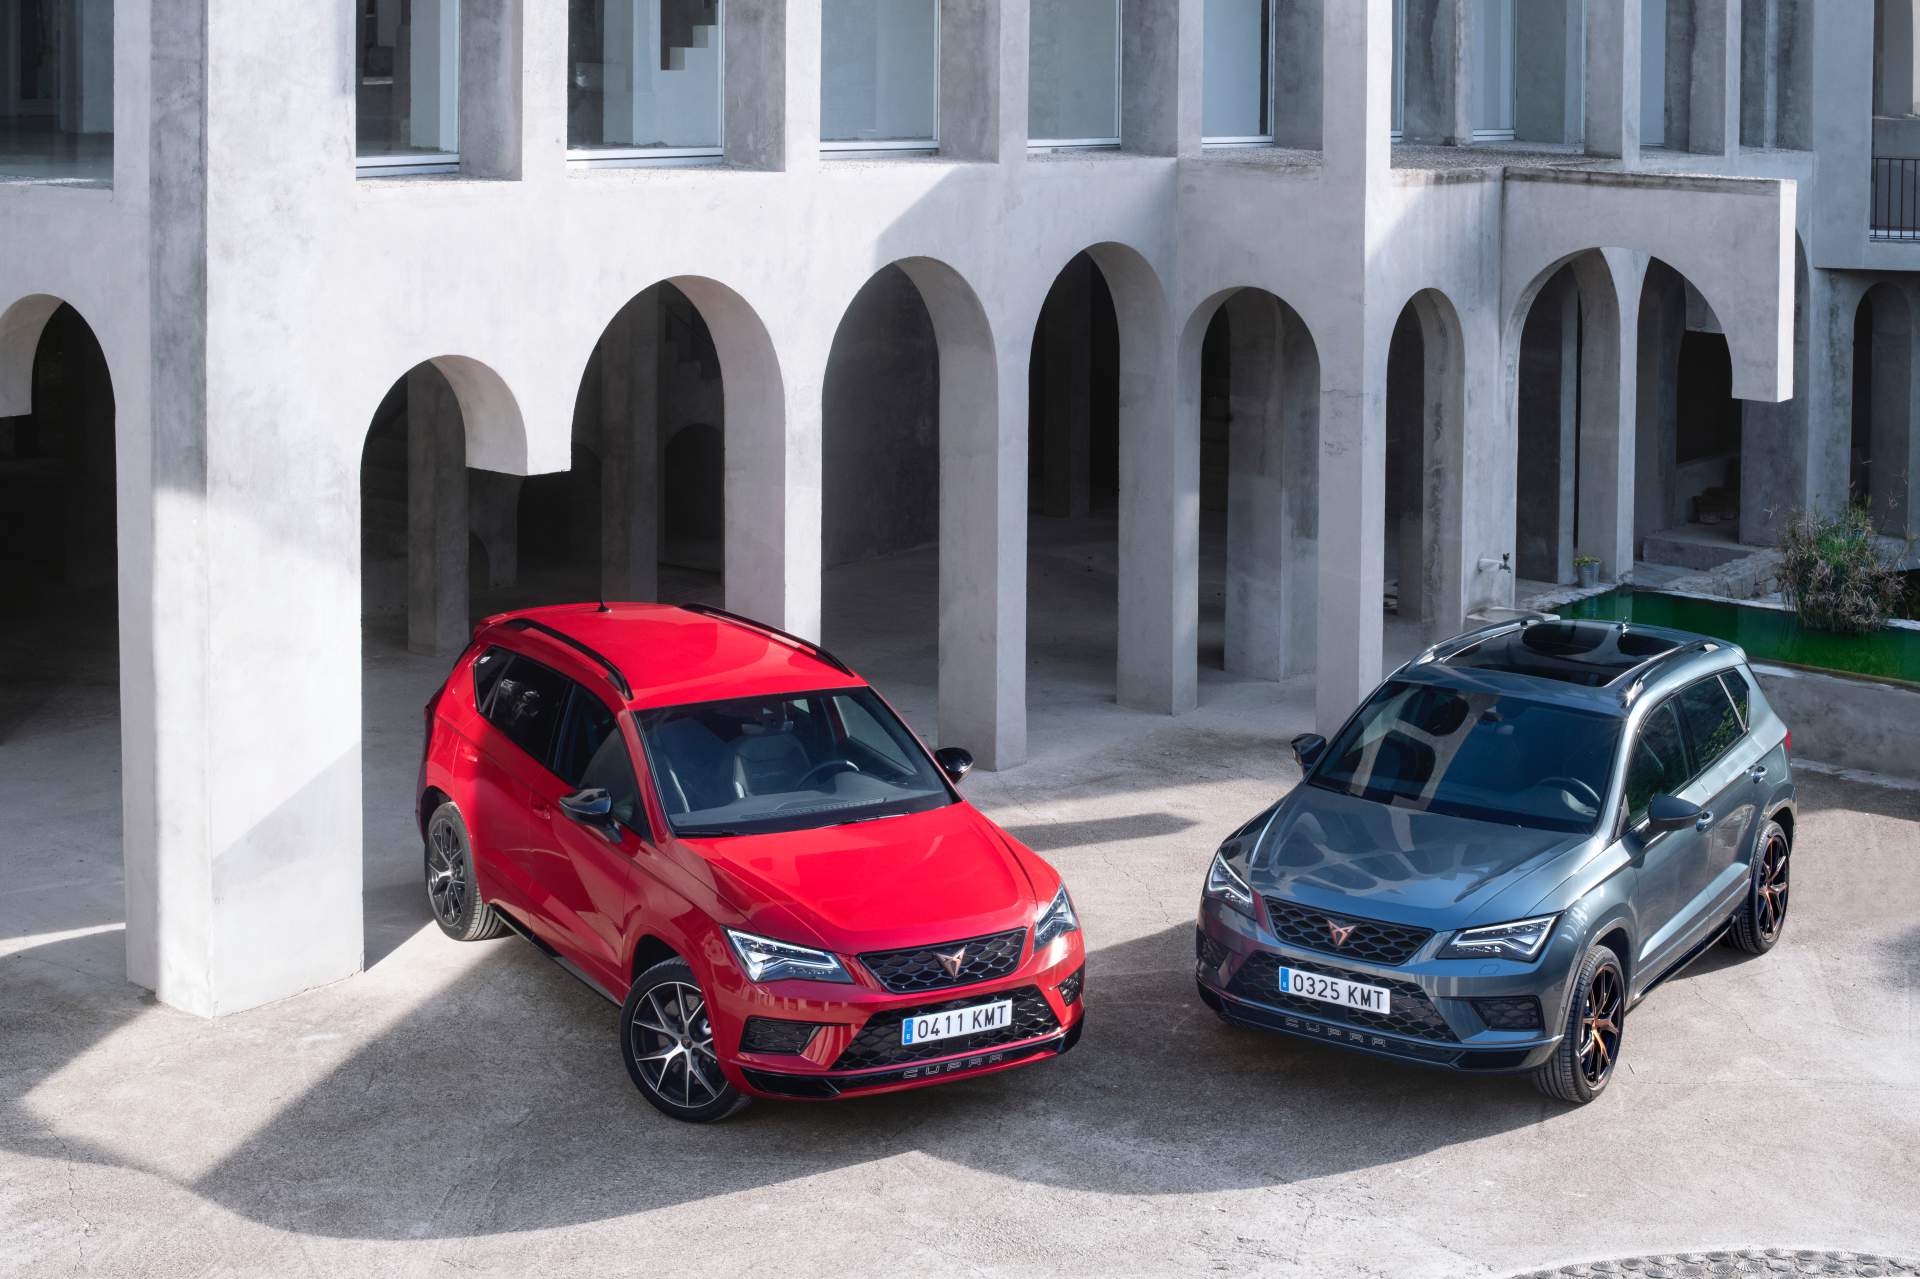 Cupra Ateca Tuned To 475 PS, 510 Nm By McChip-DKR - autoevolution